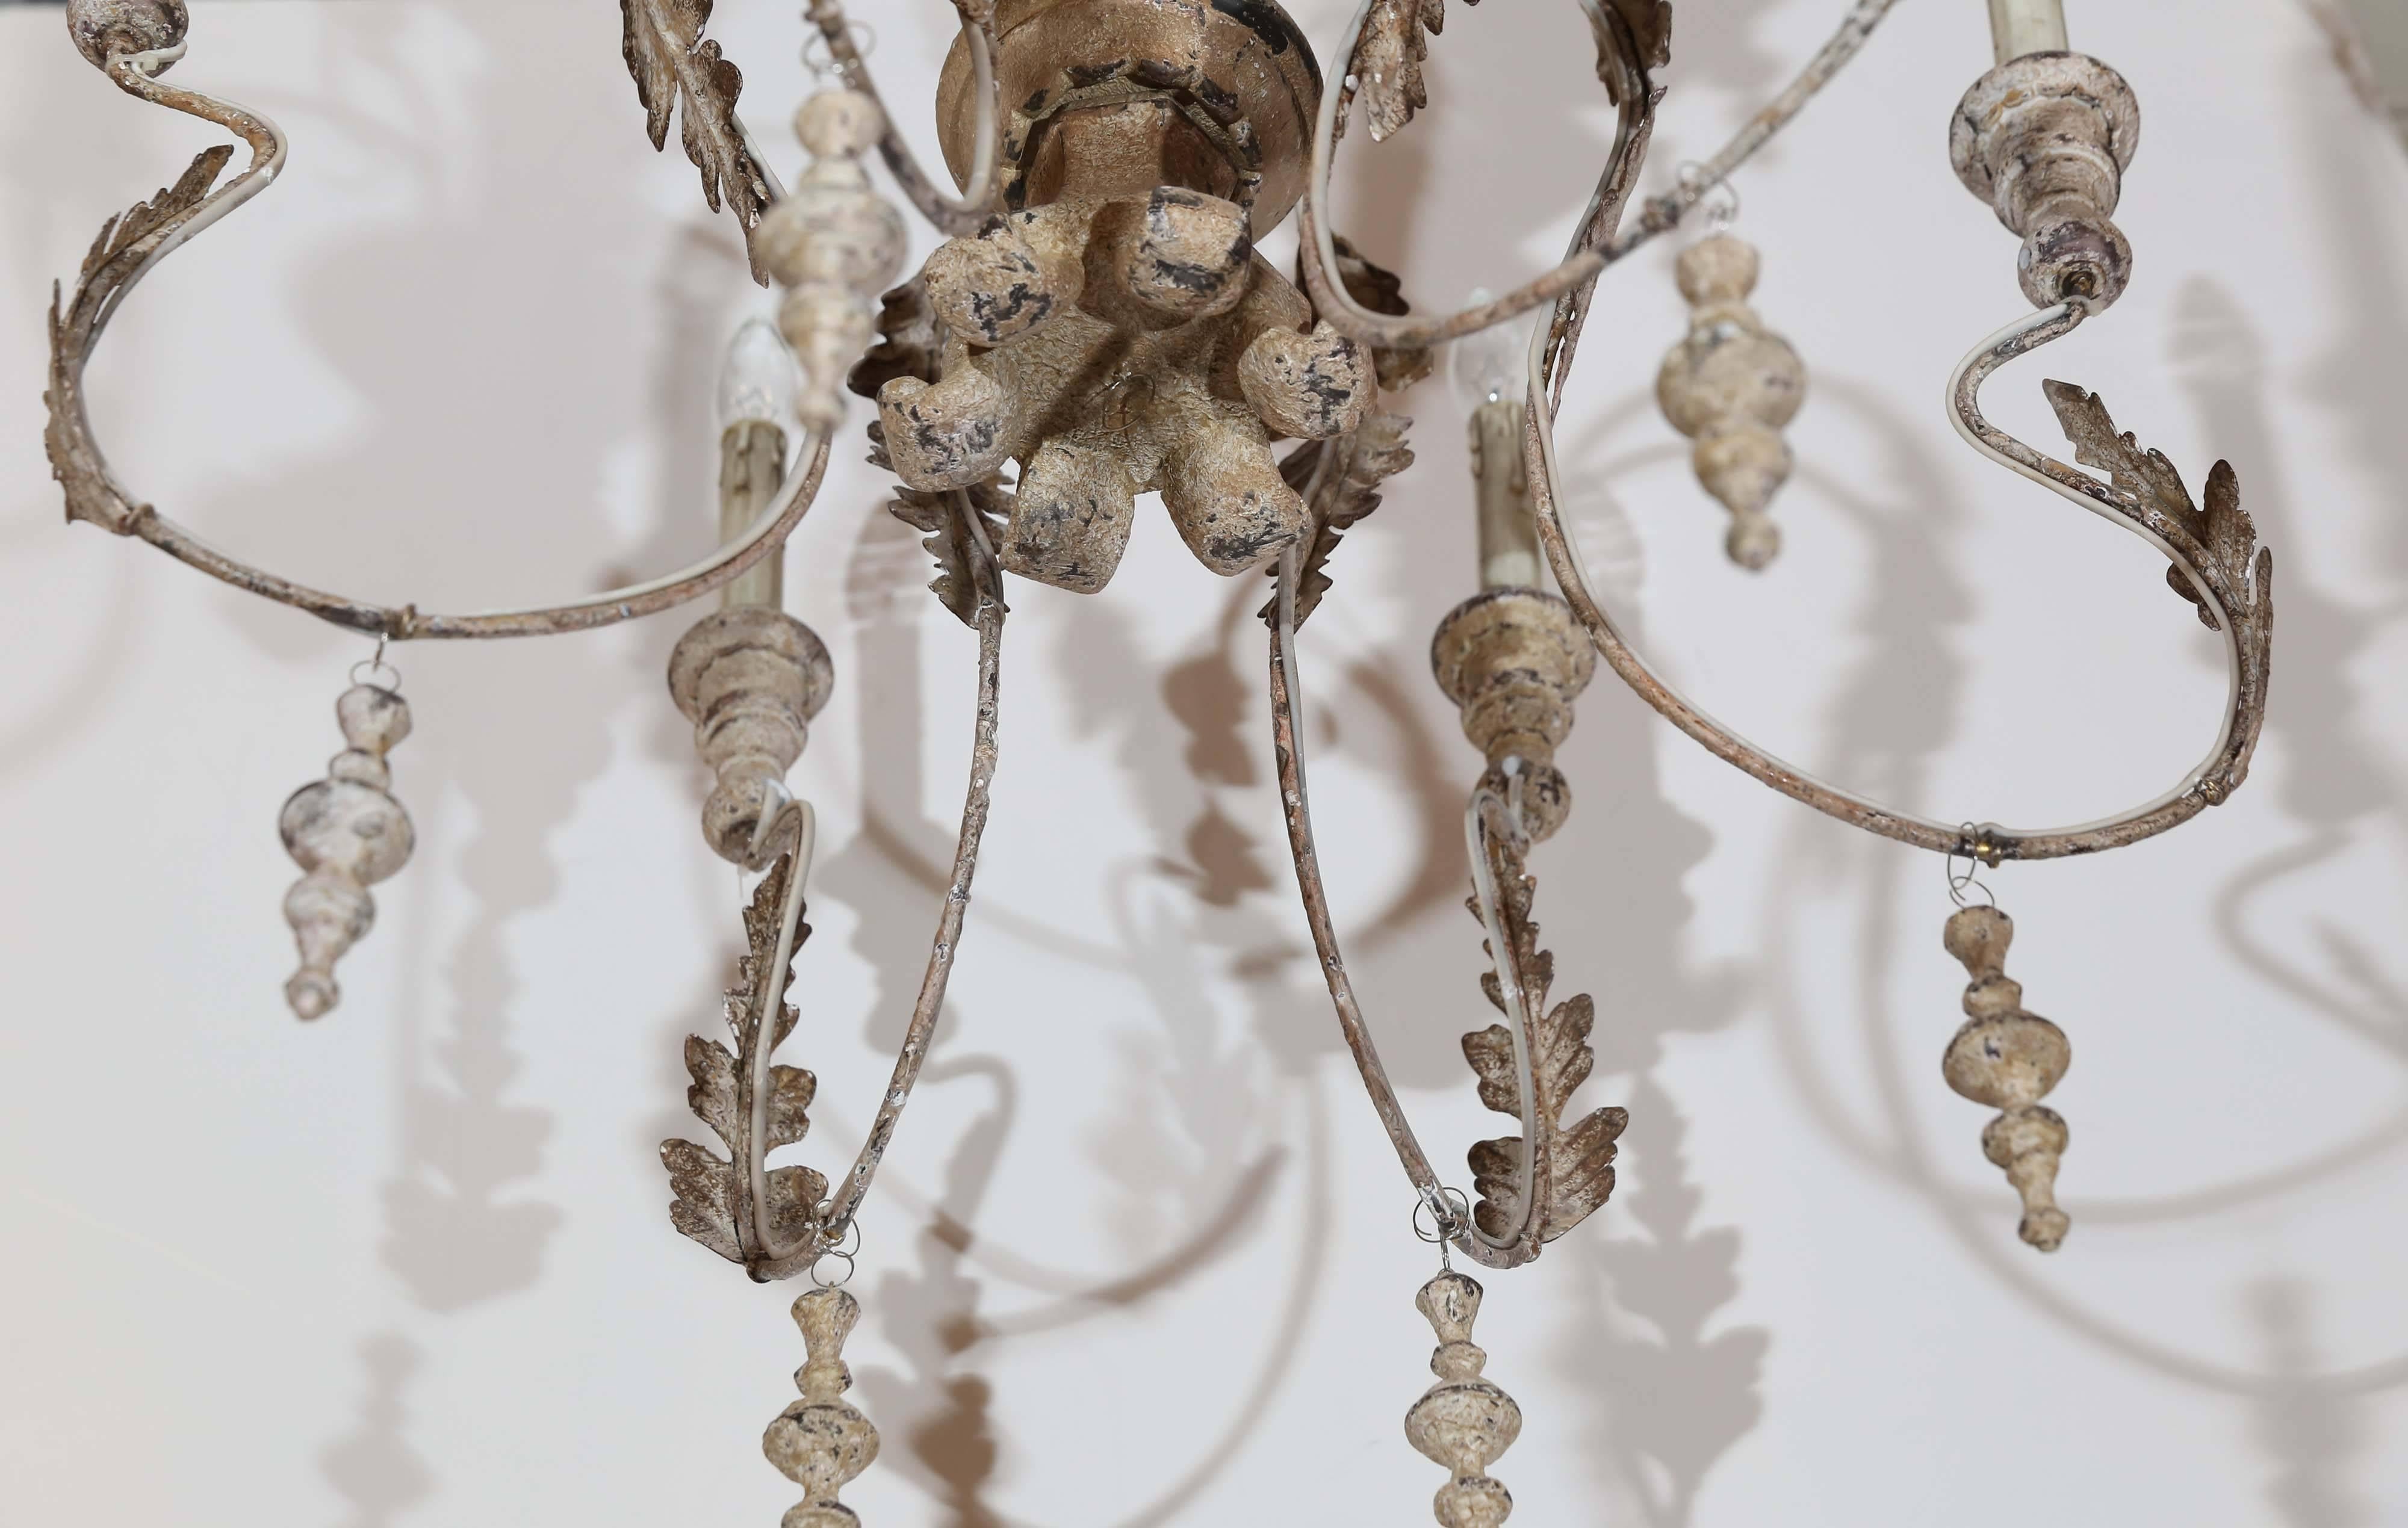 Chandelier is made up of turned wood with wire arms.

Details include metal acanthus leaves on arms and wooden tassels hanging from bottom.